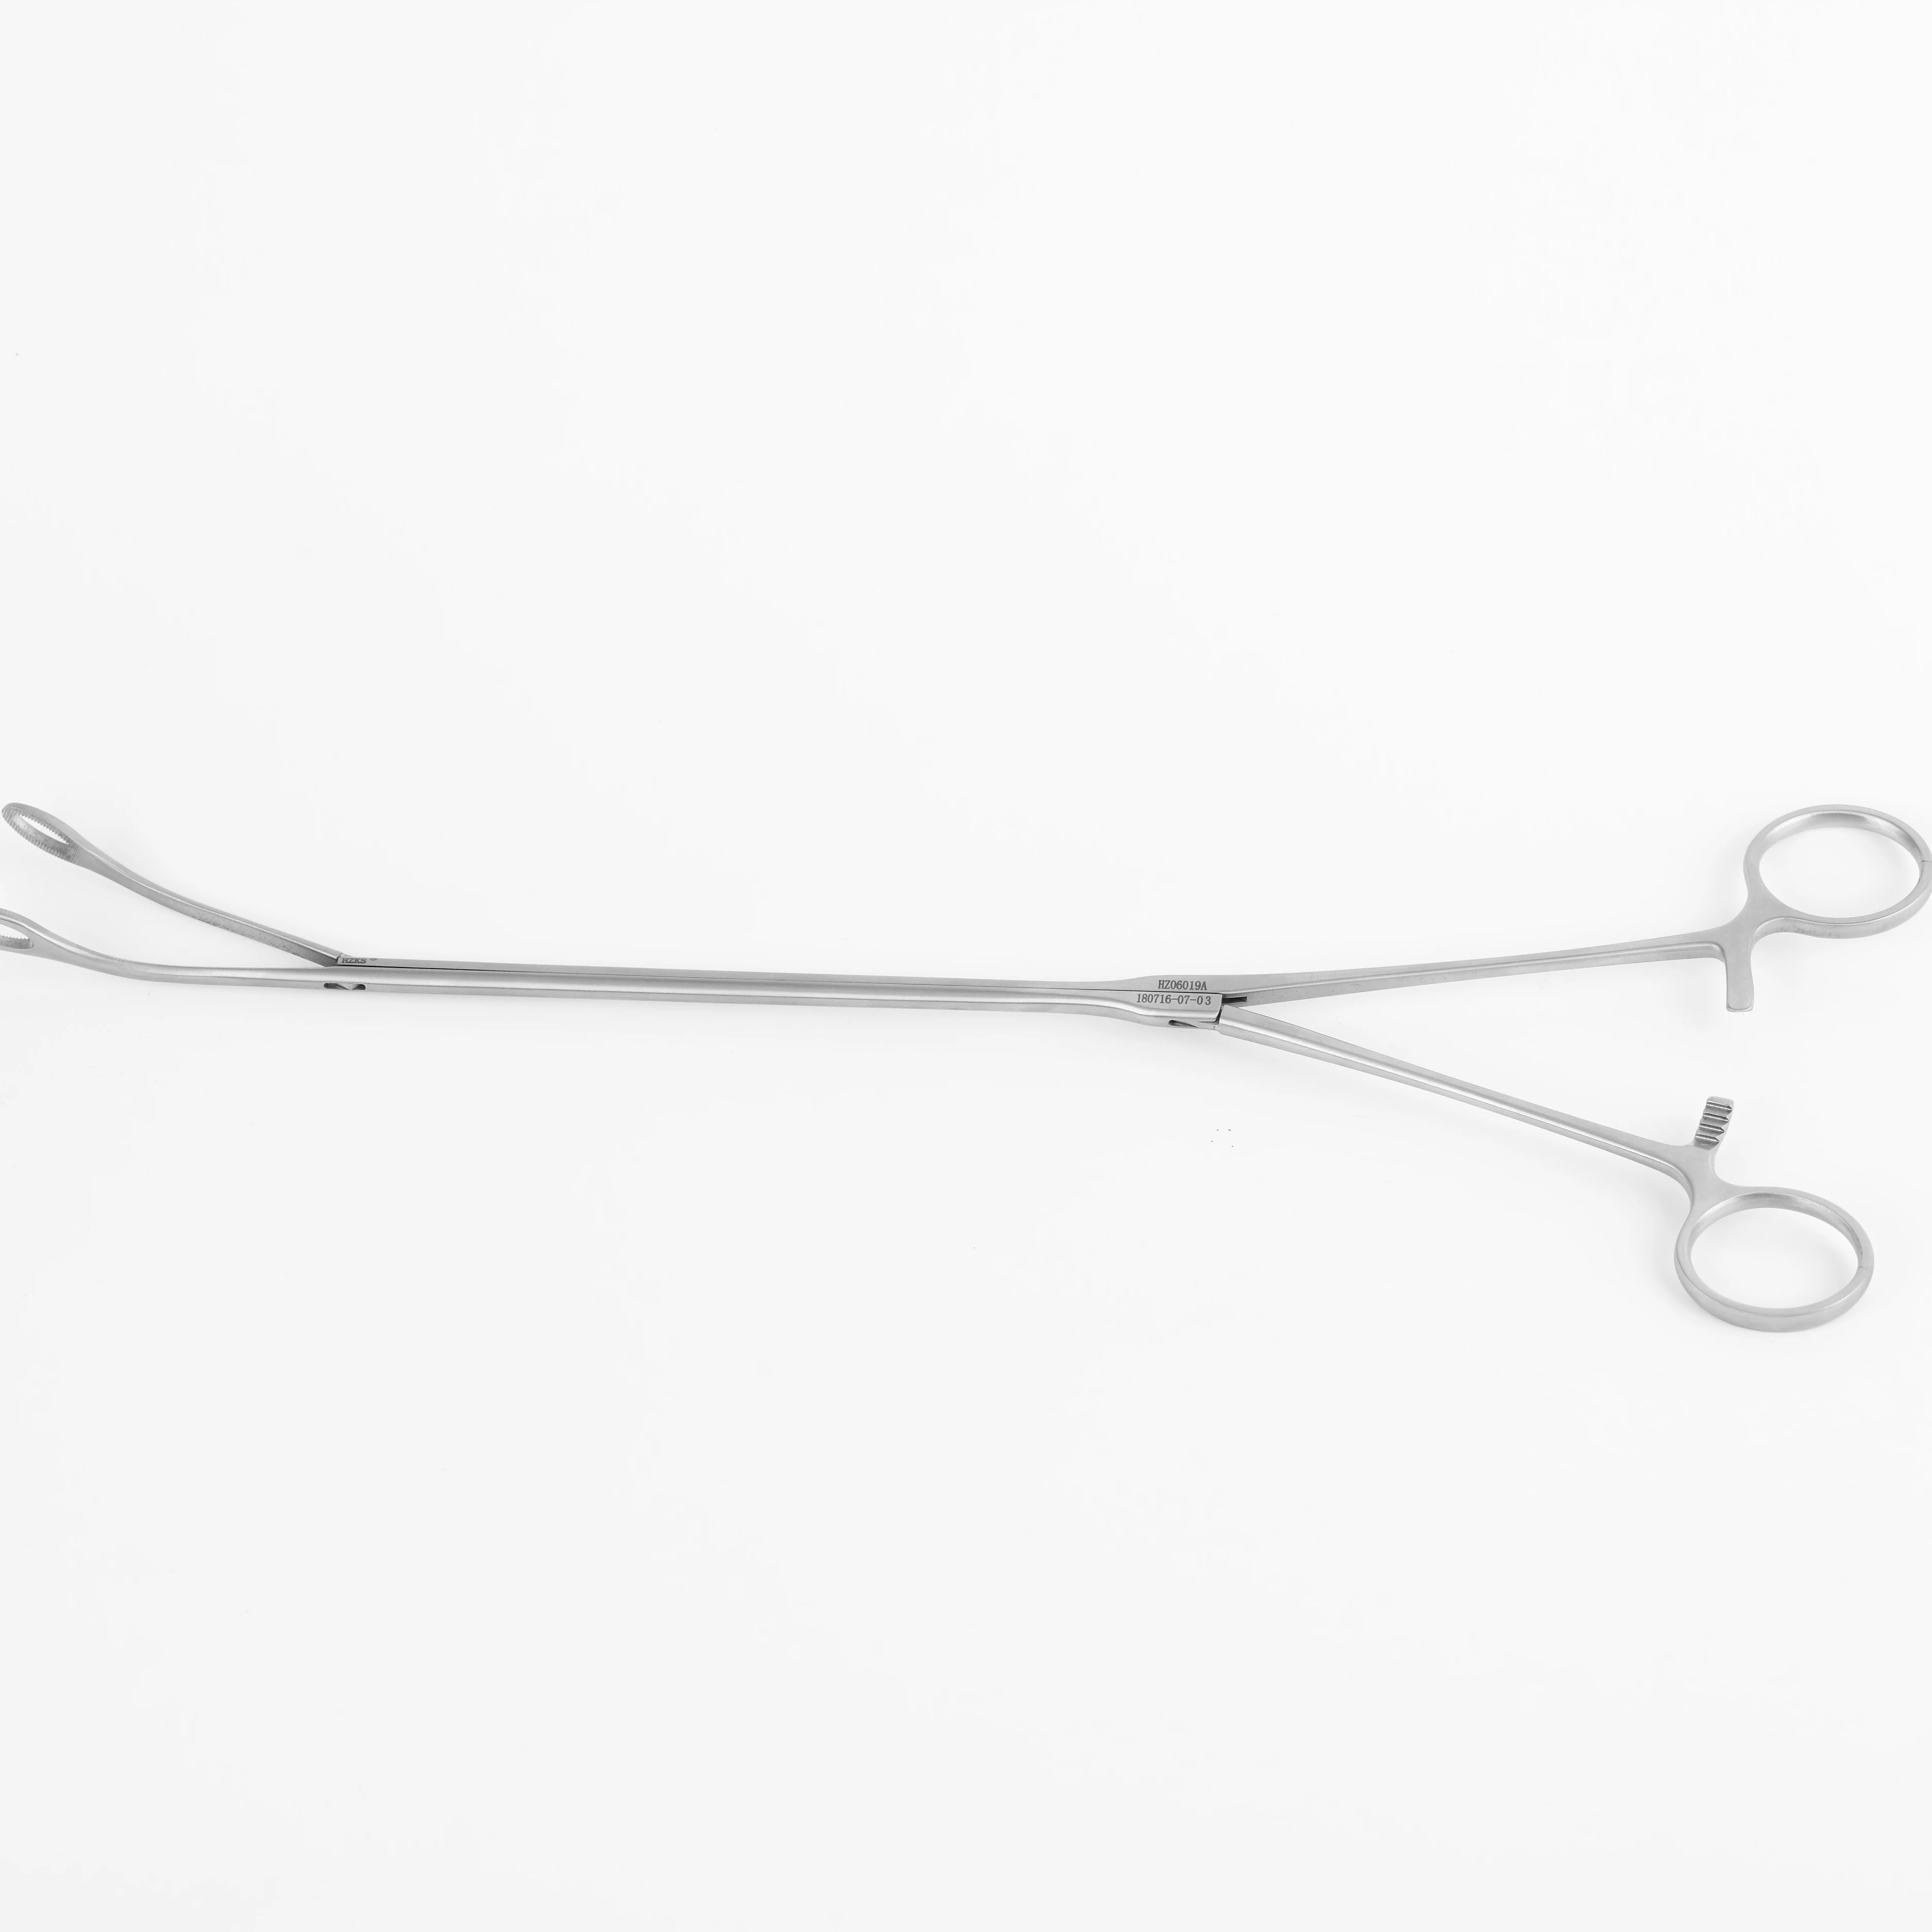 Reusable surgical instruments/medical supplies